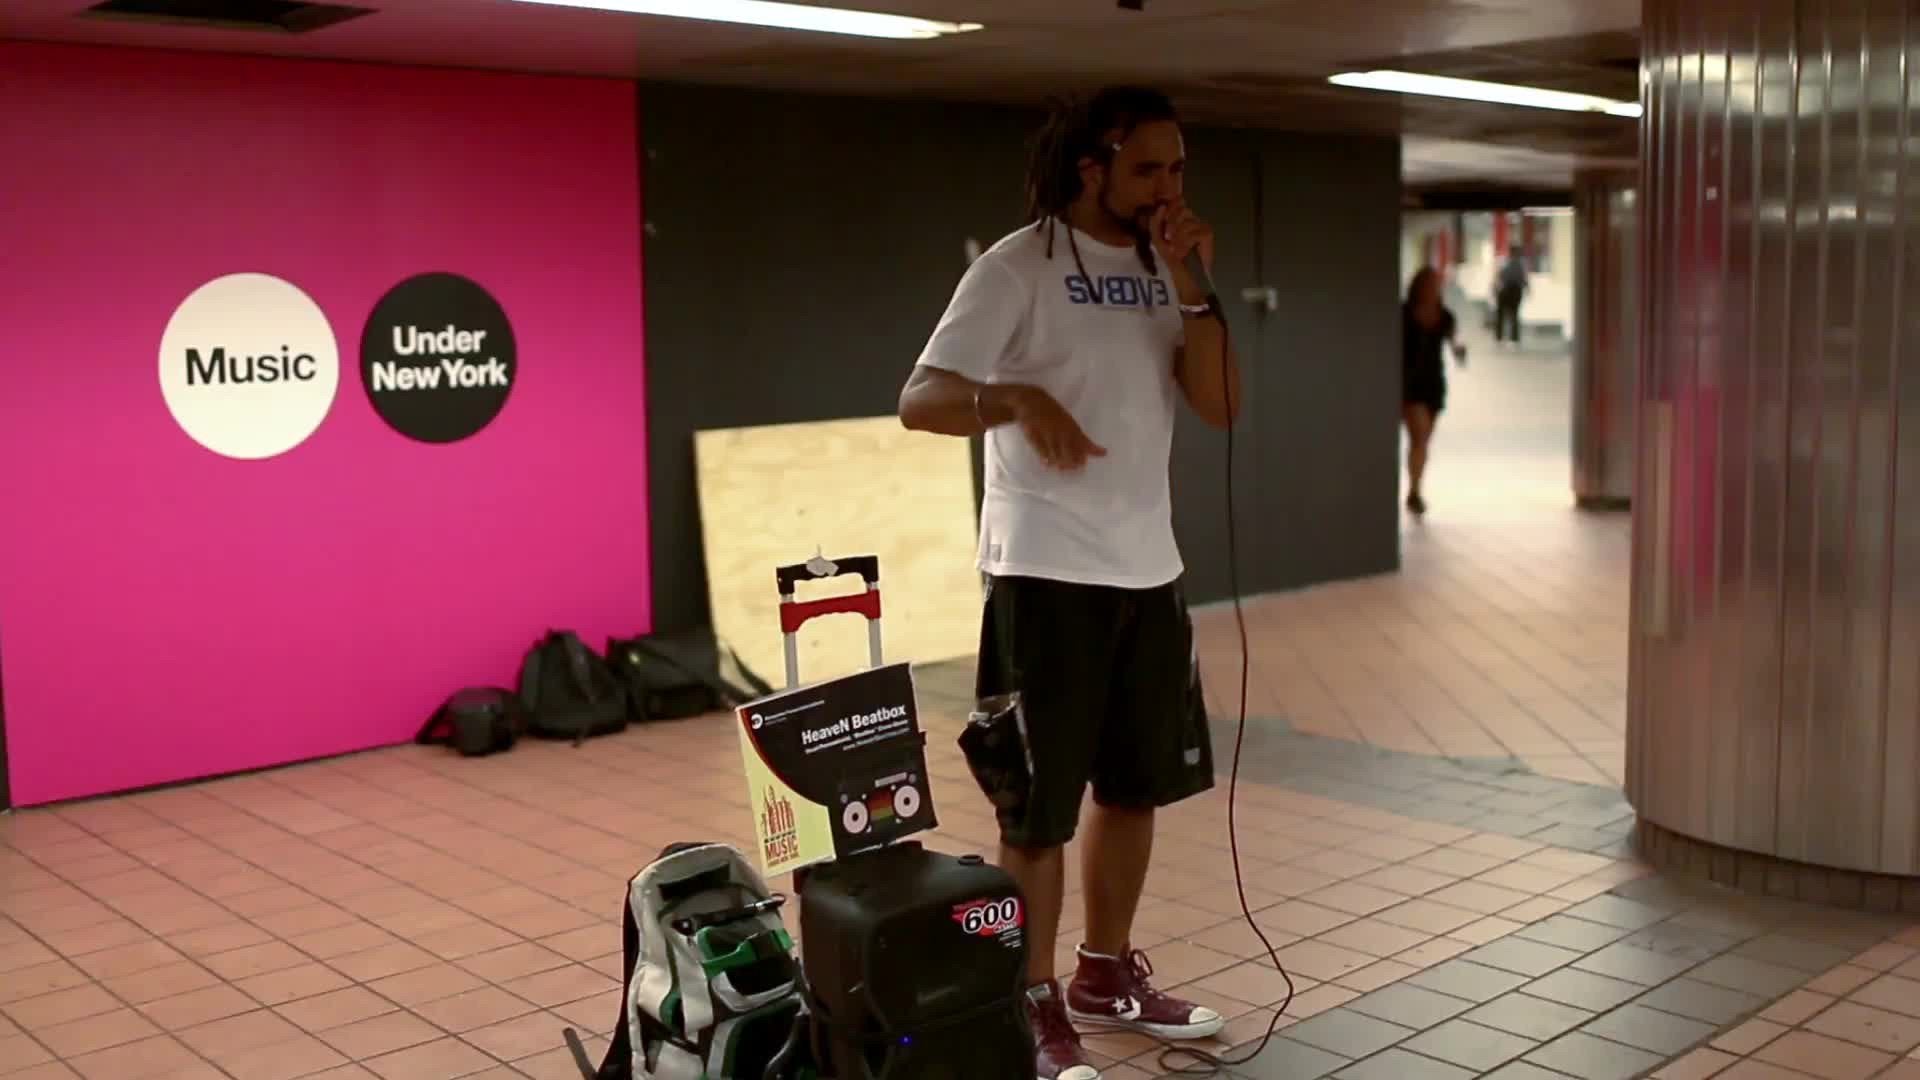 musician beatboxing - beatboxer in subway station in summer - New York City